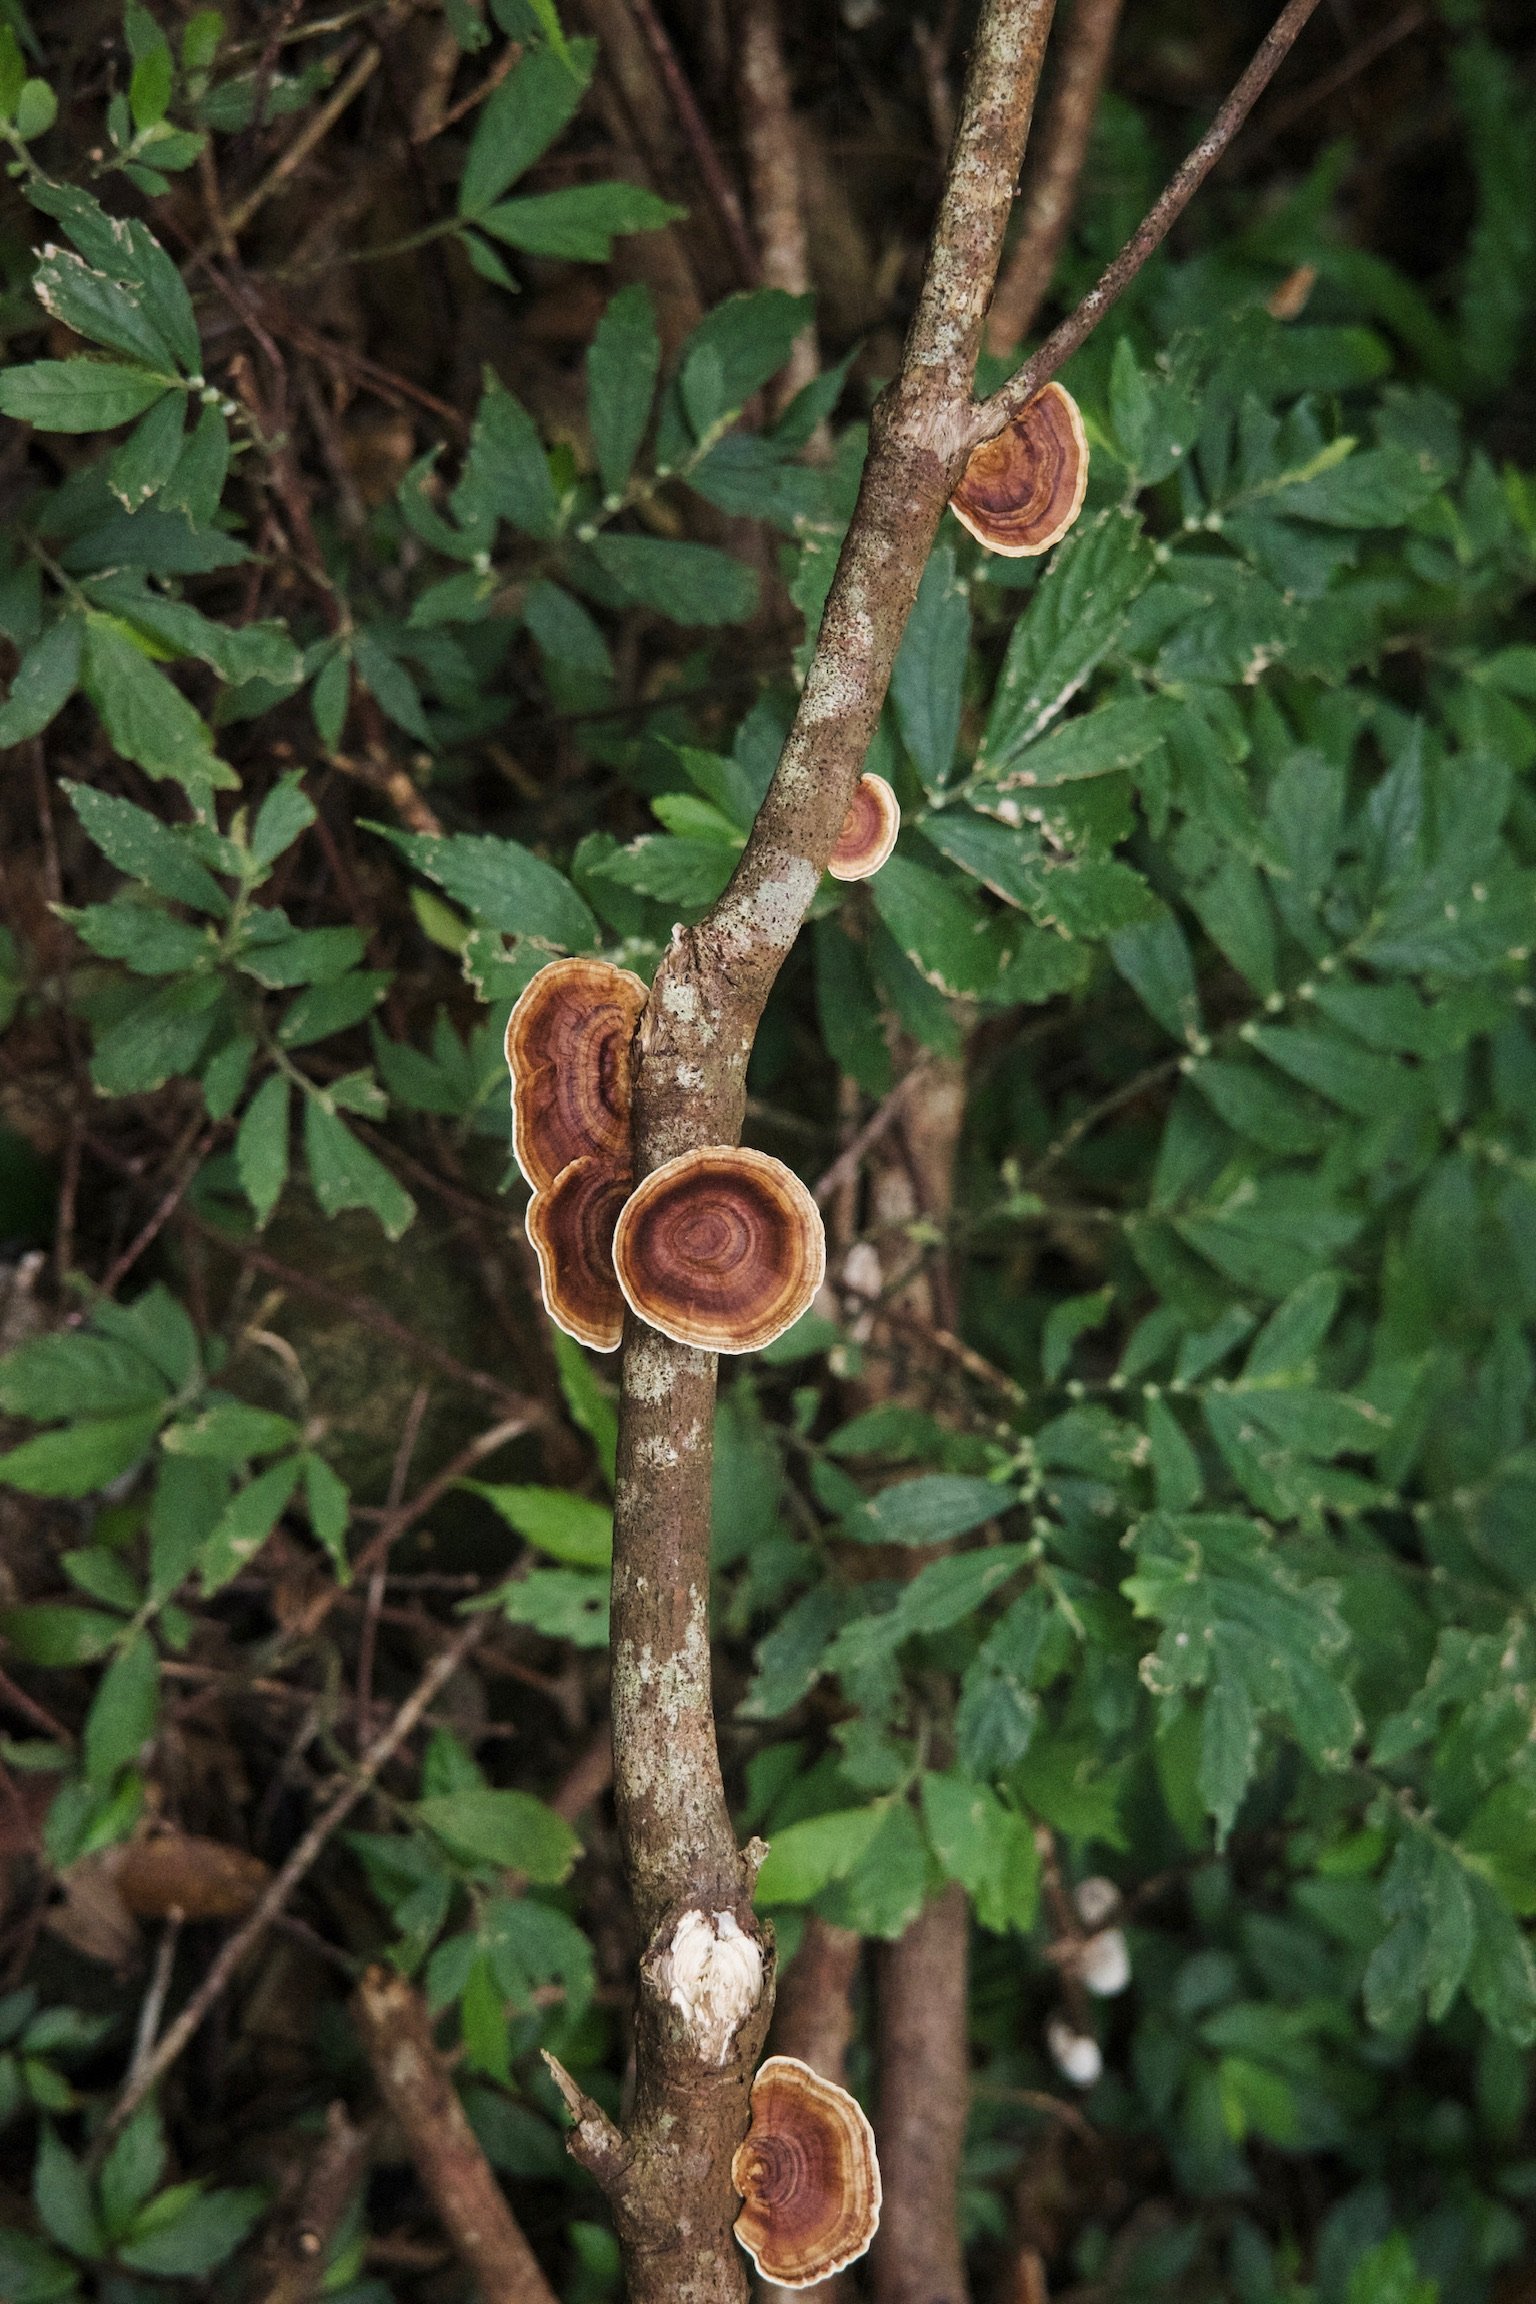 Fungi that look like ears on a tree branch.